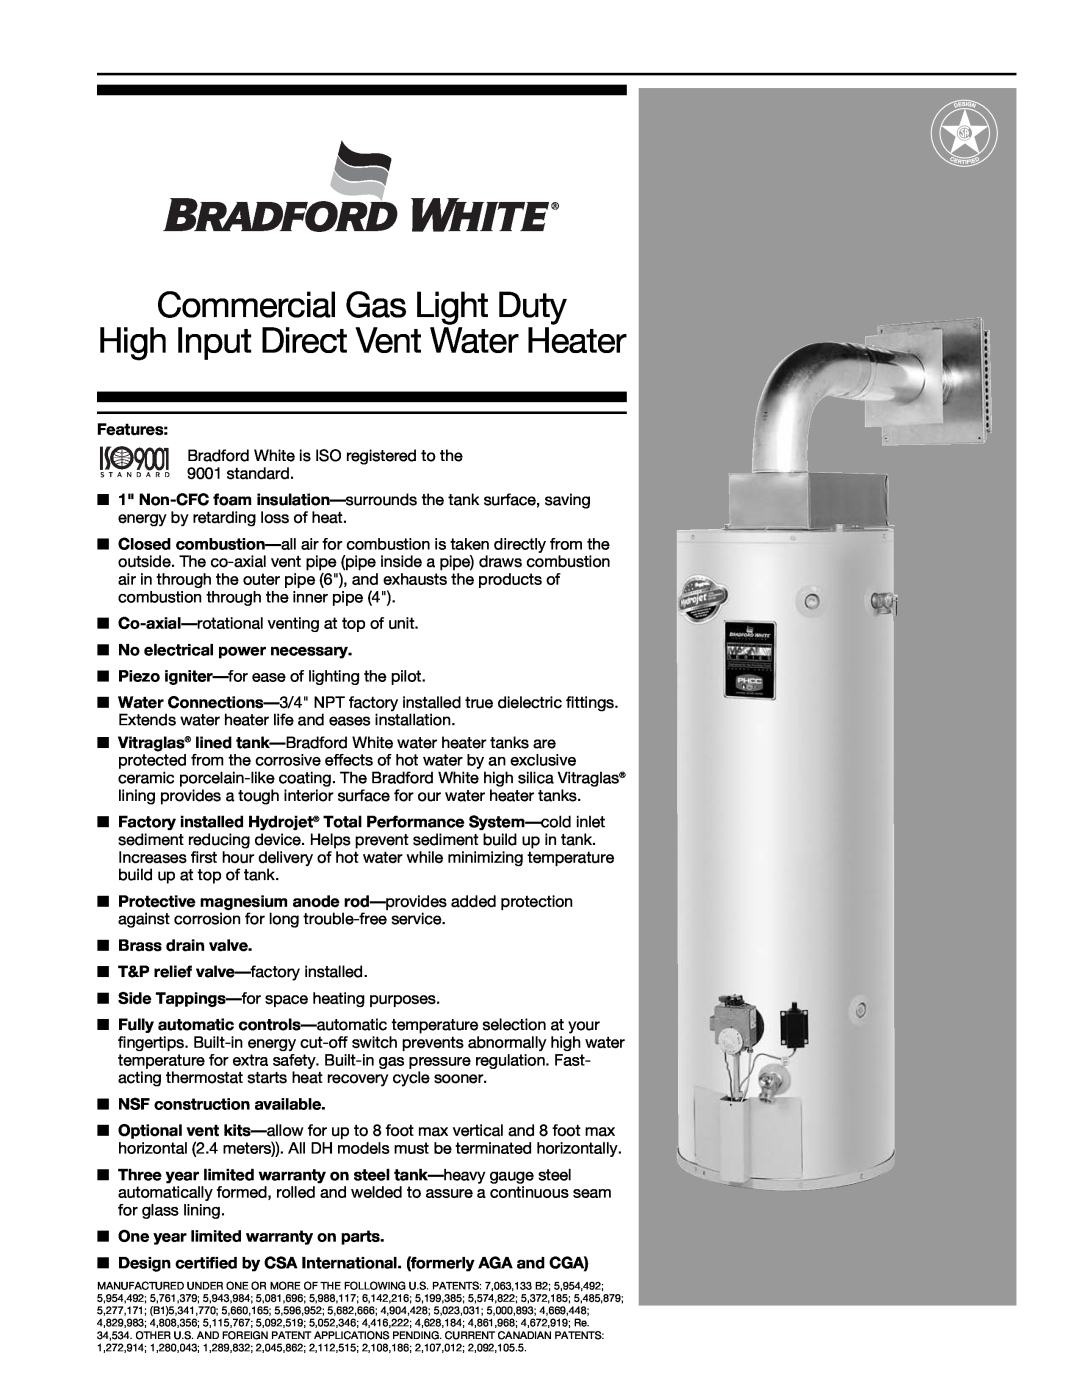 Bradford-White Corp 705-B warranty Commercial Gas Light Duty High Input Direct Vent Water Heater, 9001, Features 